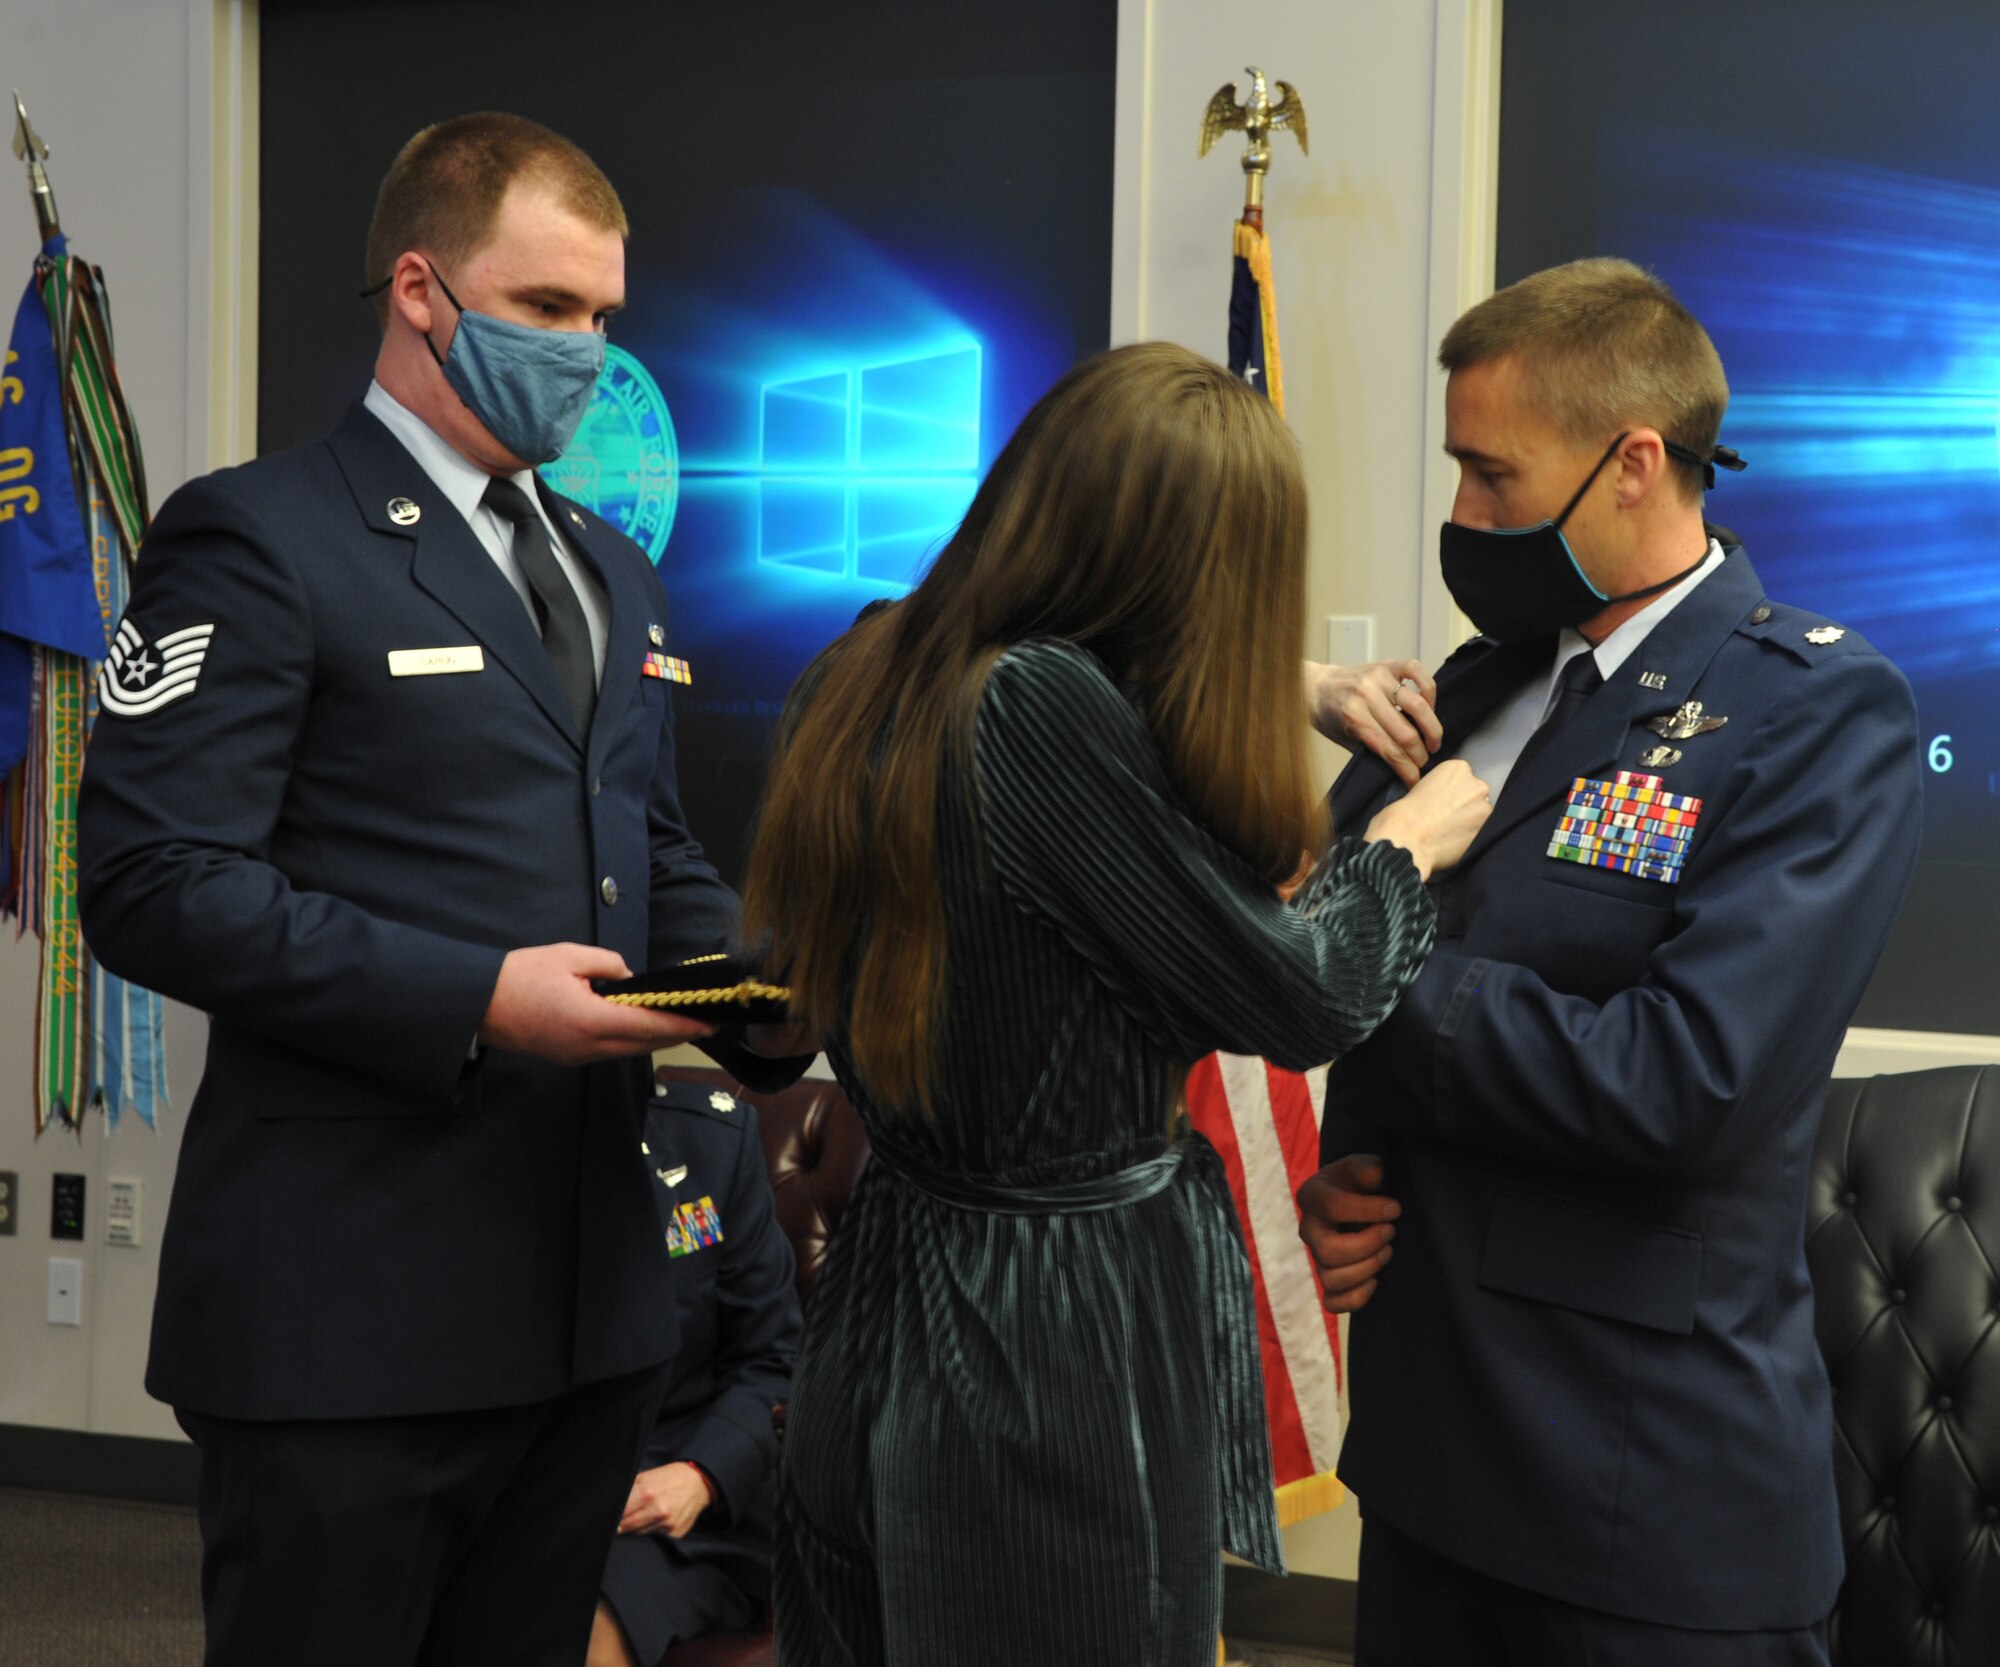 Lt. Col Daniel Arneson receives commander's pin from his wife, Heather, after becoming the new commander of the 728th Airlift Squadron during a change of command ceremony at Joint Base Lewis-McChord, Washington, March 6, 2021.